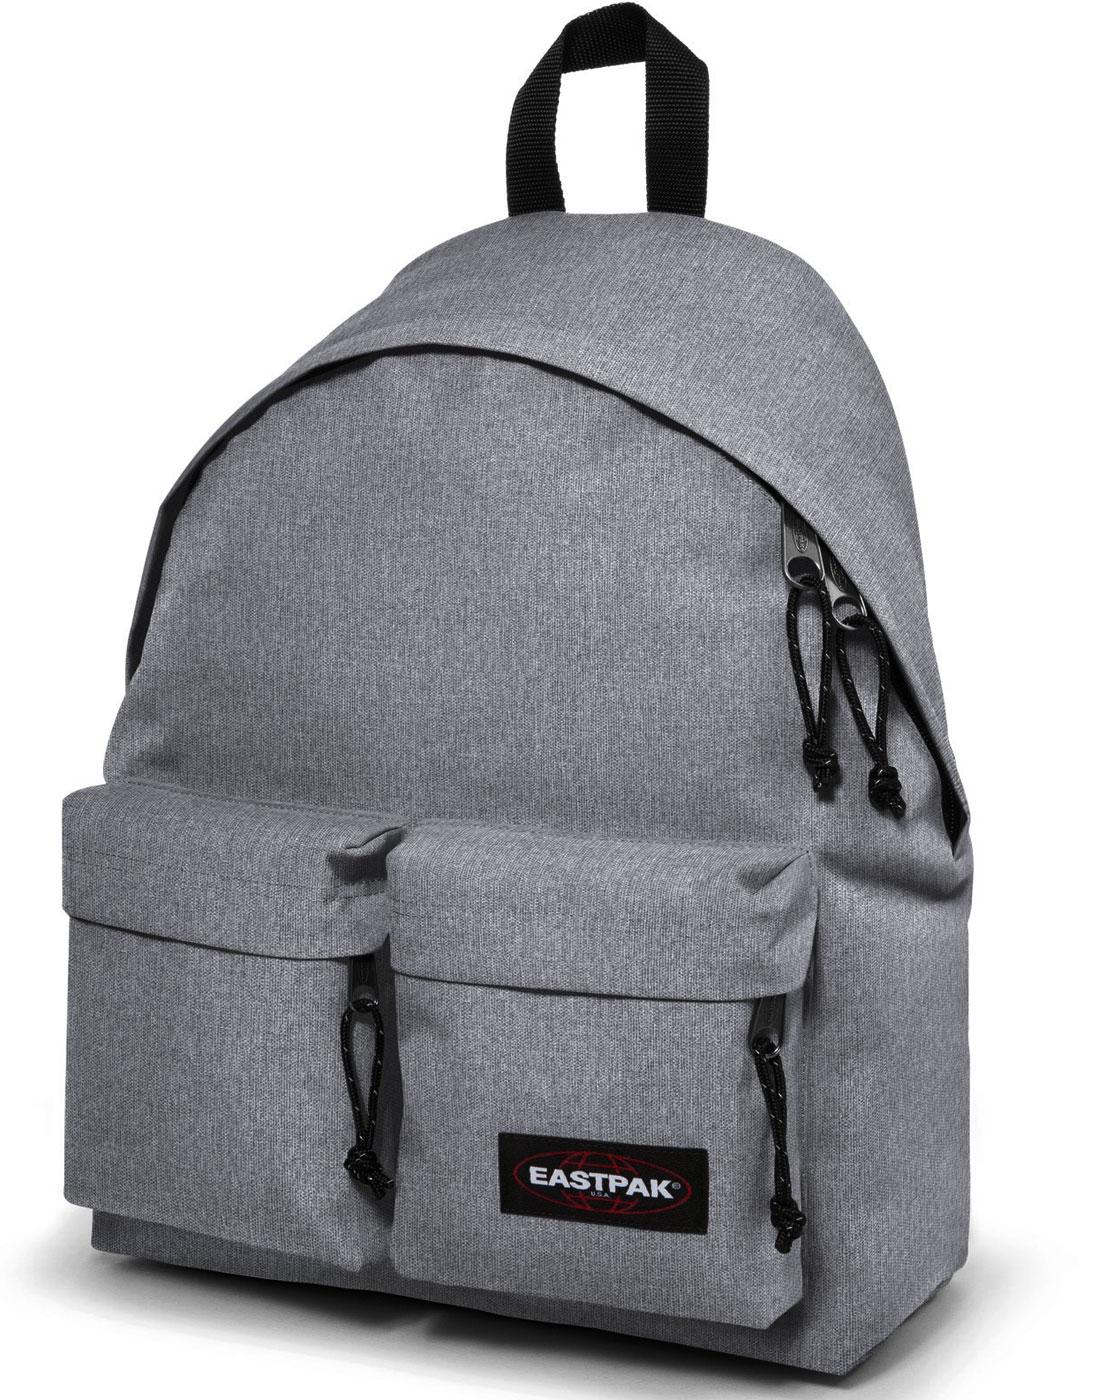 EASTPAK Padded Doubl'r Retro 1970s Backpack in Sunday Grey